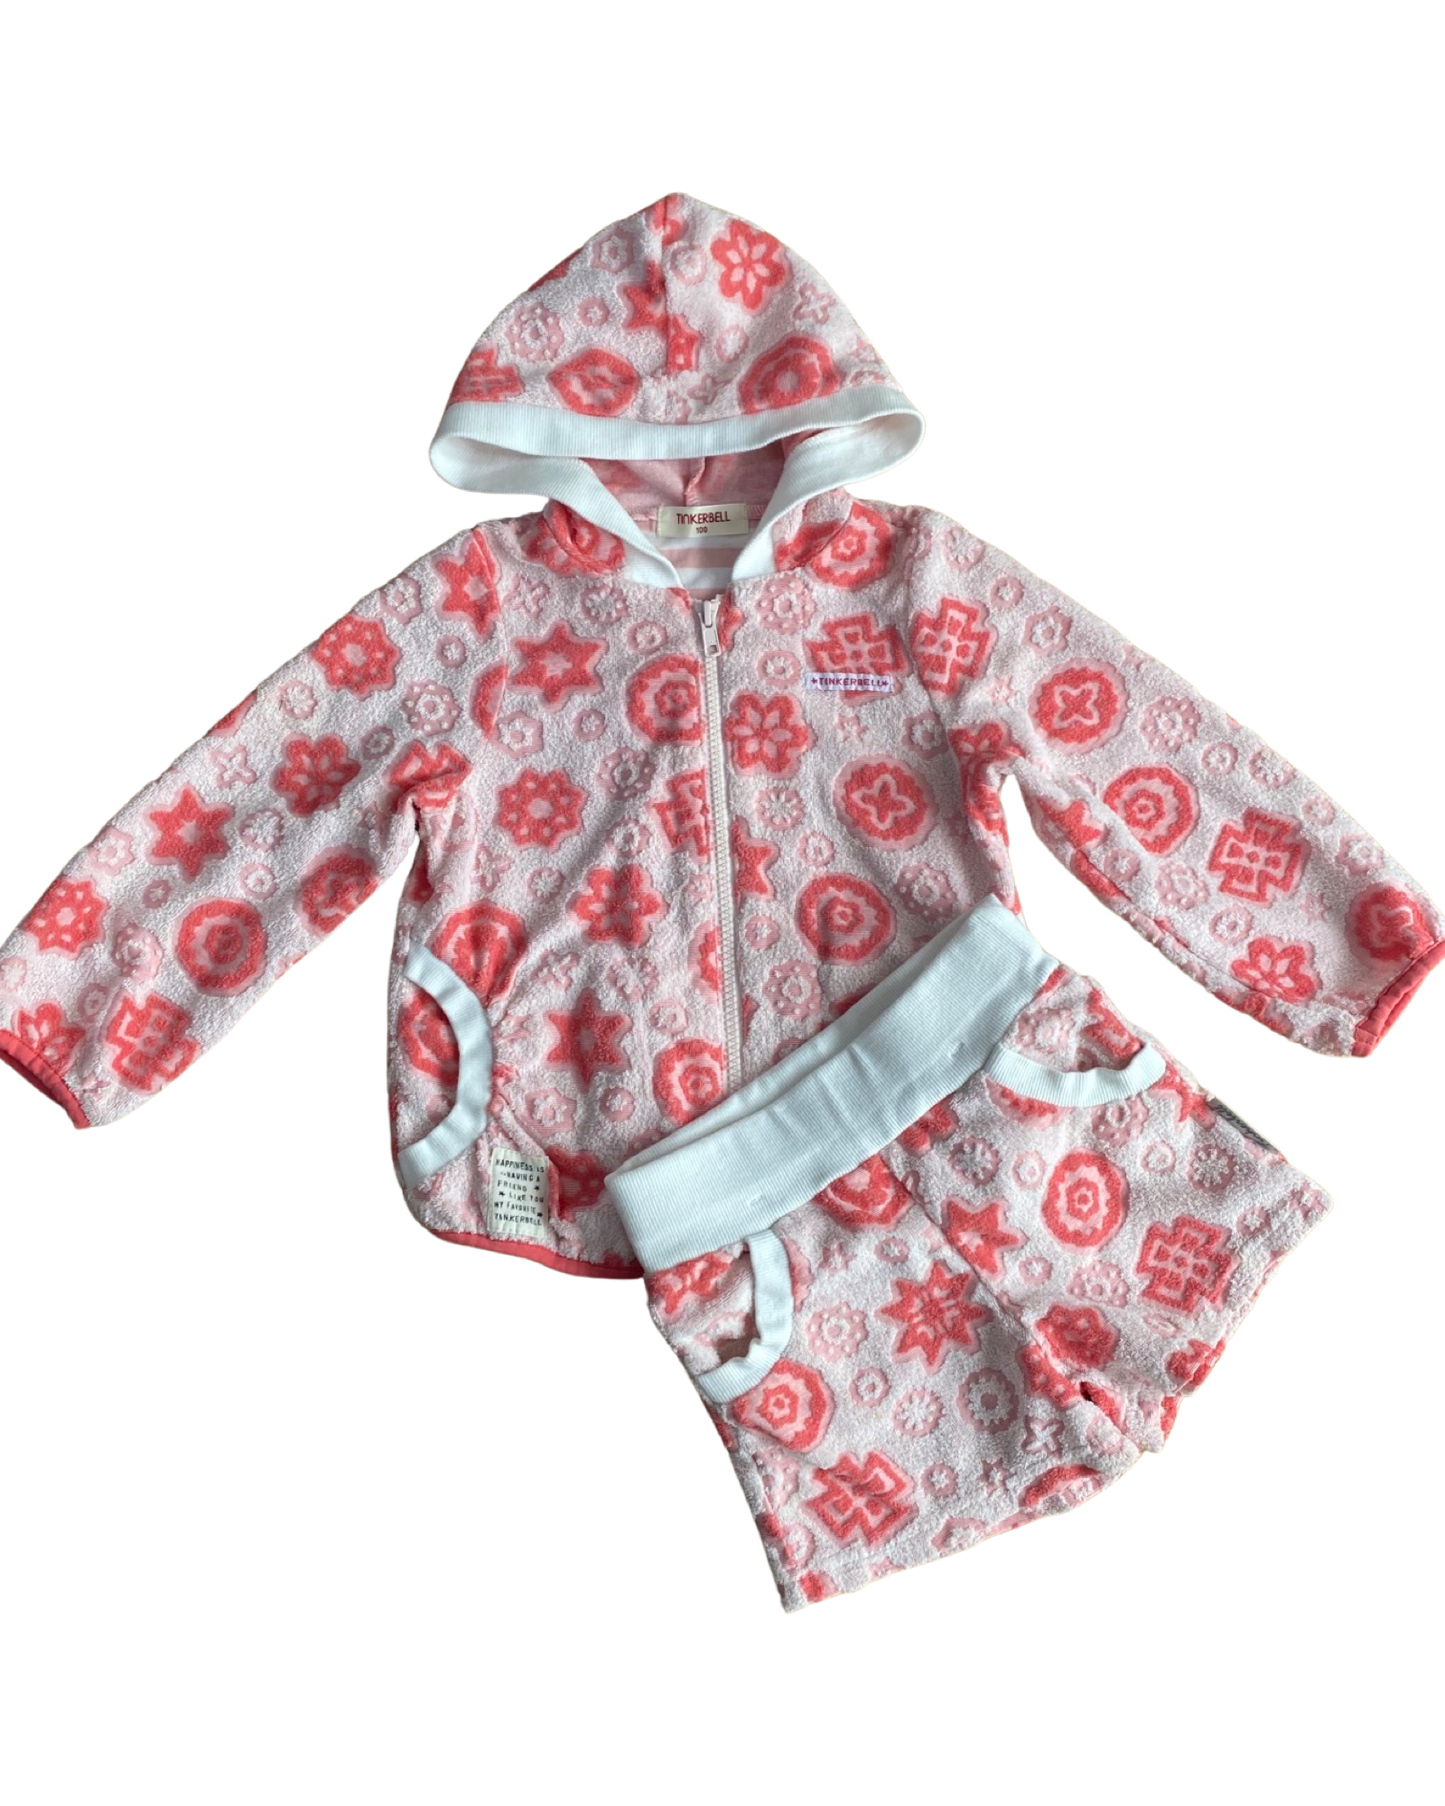 Tinkerbell Japan pink patterned terry towelling 2 piece set (3-4yrs)